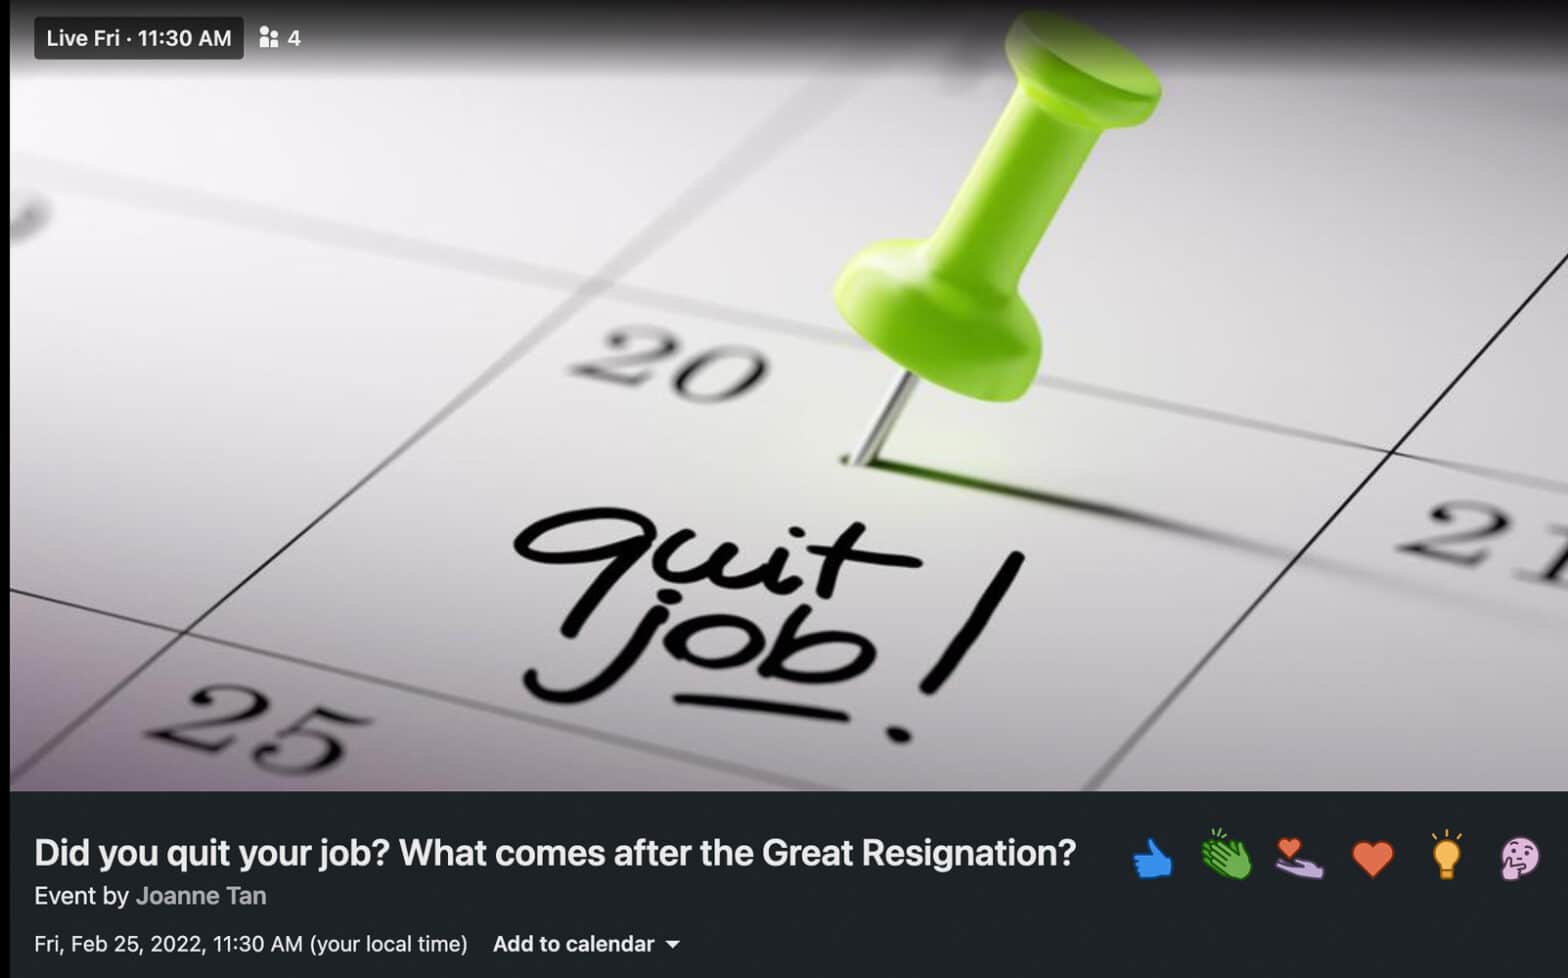 Joanne Z. Tan, global branding expert,10 Plus Brand, Inc. will talk about what's ahead of careers' changers, job quitters of the Great Resignation on LinkedIn